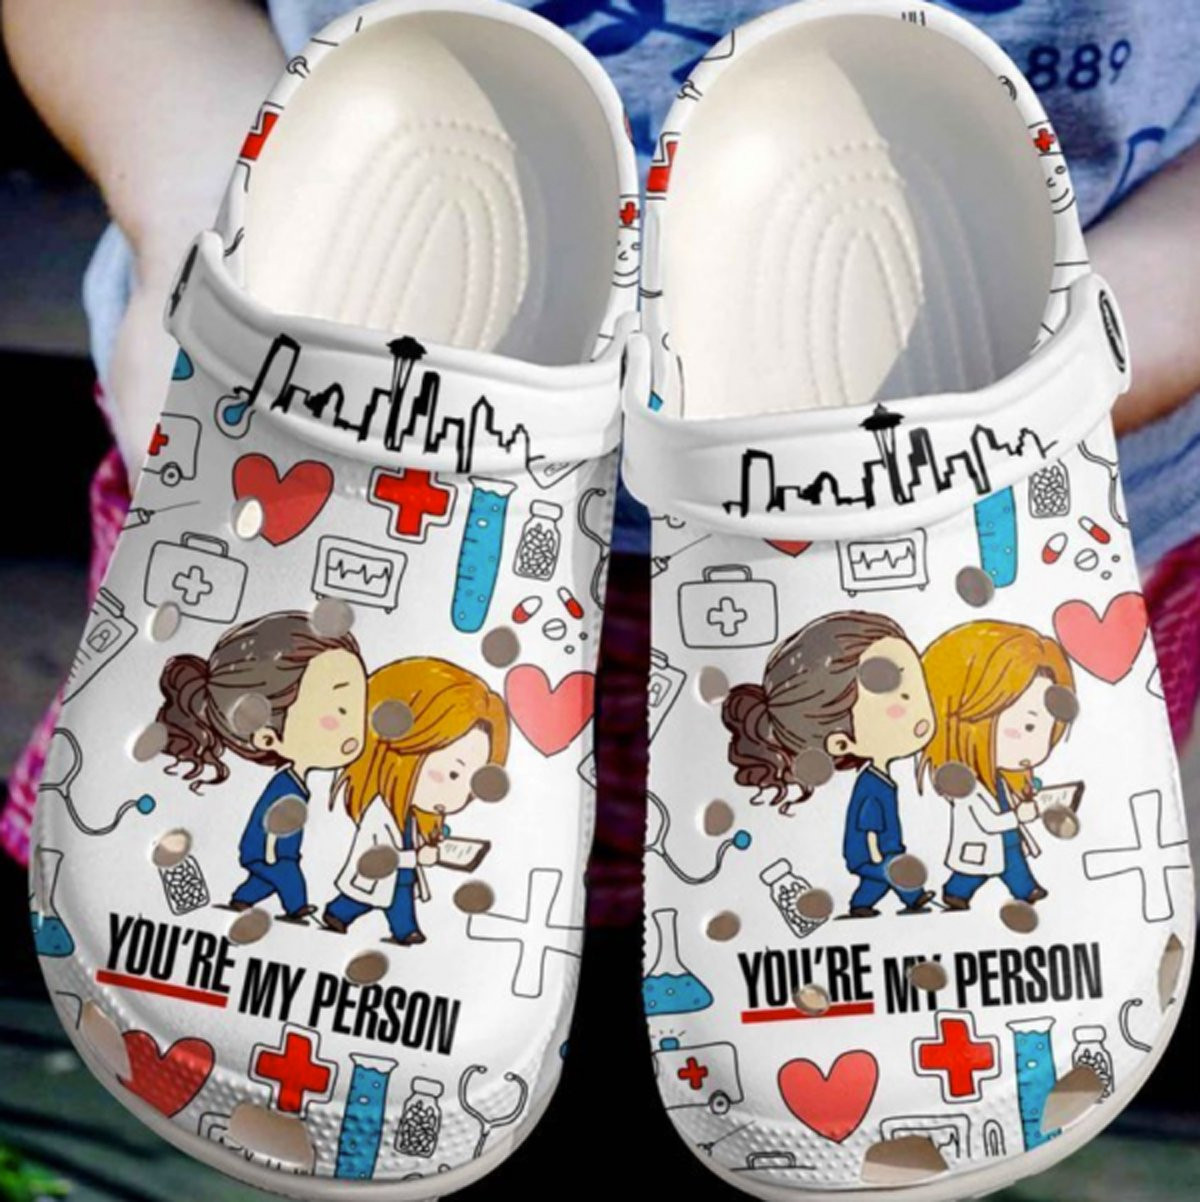 Cute Nurse Cartoon Crocs Shoes - You Are My Person Shoes Crocbland Clog Birthday Gifts For Friends